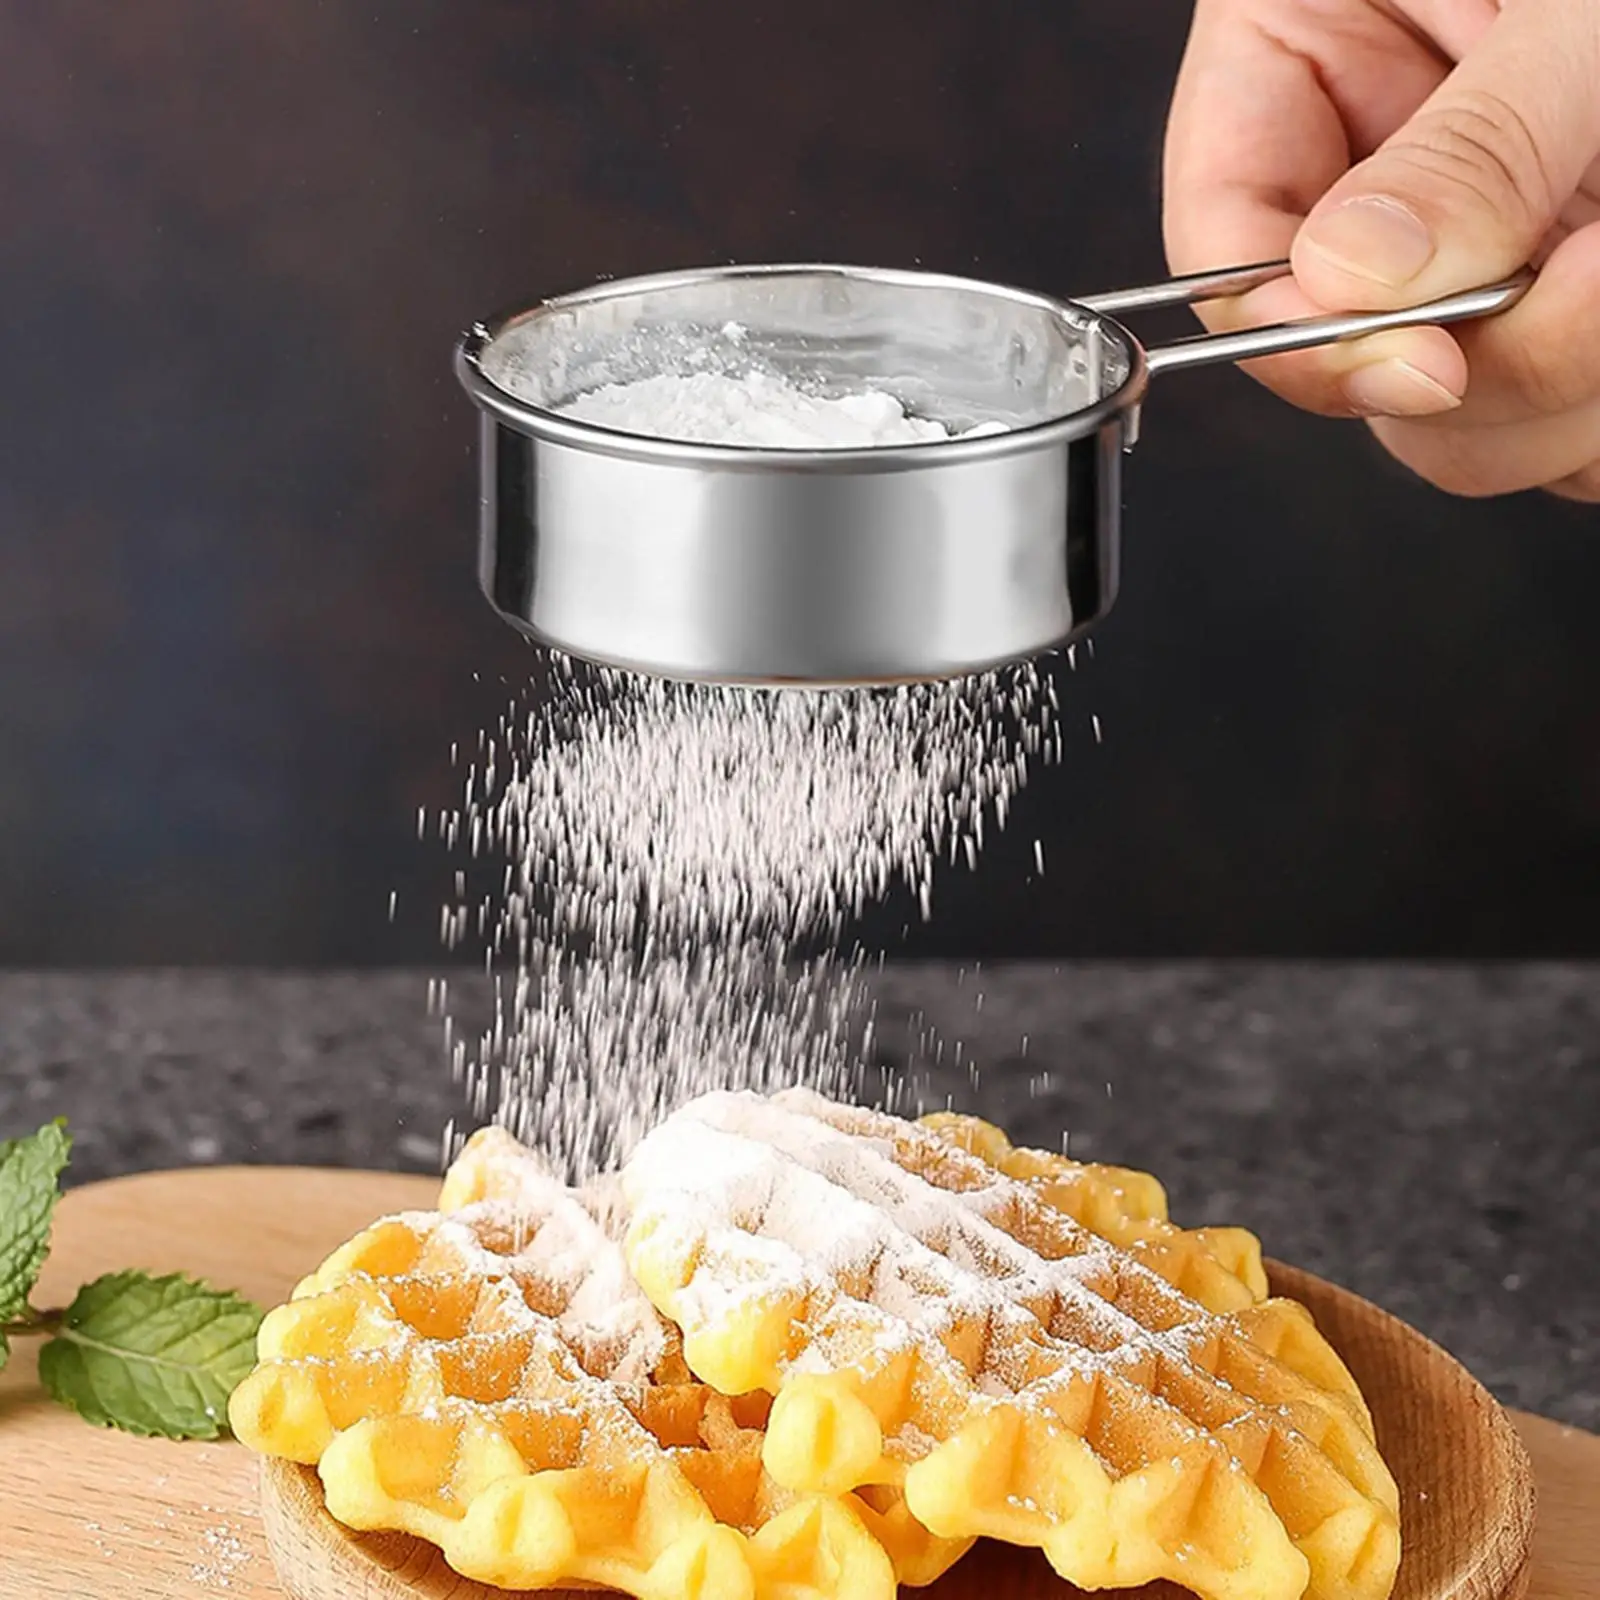 Stainless Steel Flour Sifter Multipurpose with Handles Mini Kitchen Accessories Kitchen Oil Strainer for Spices Baking Sugar